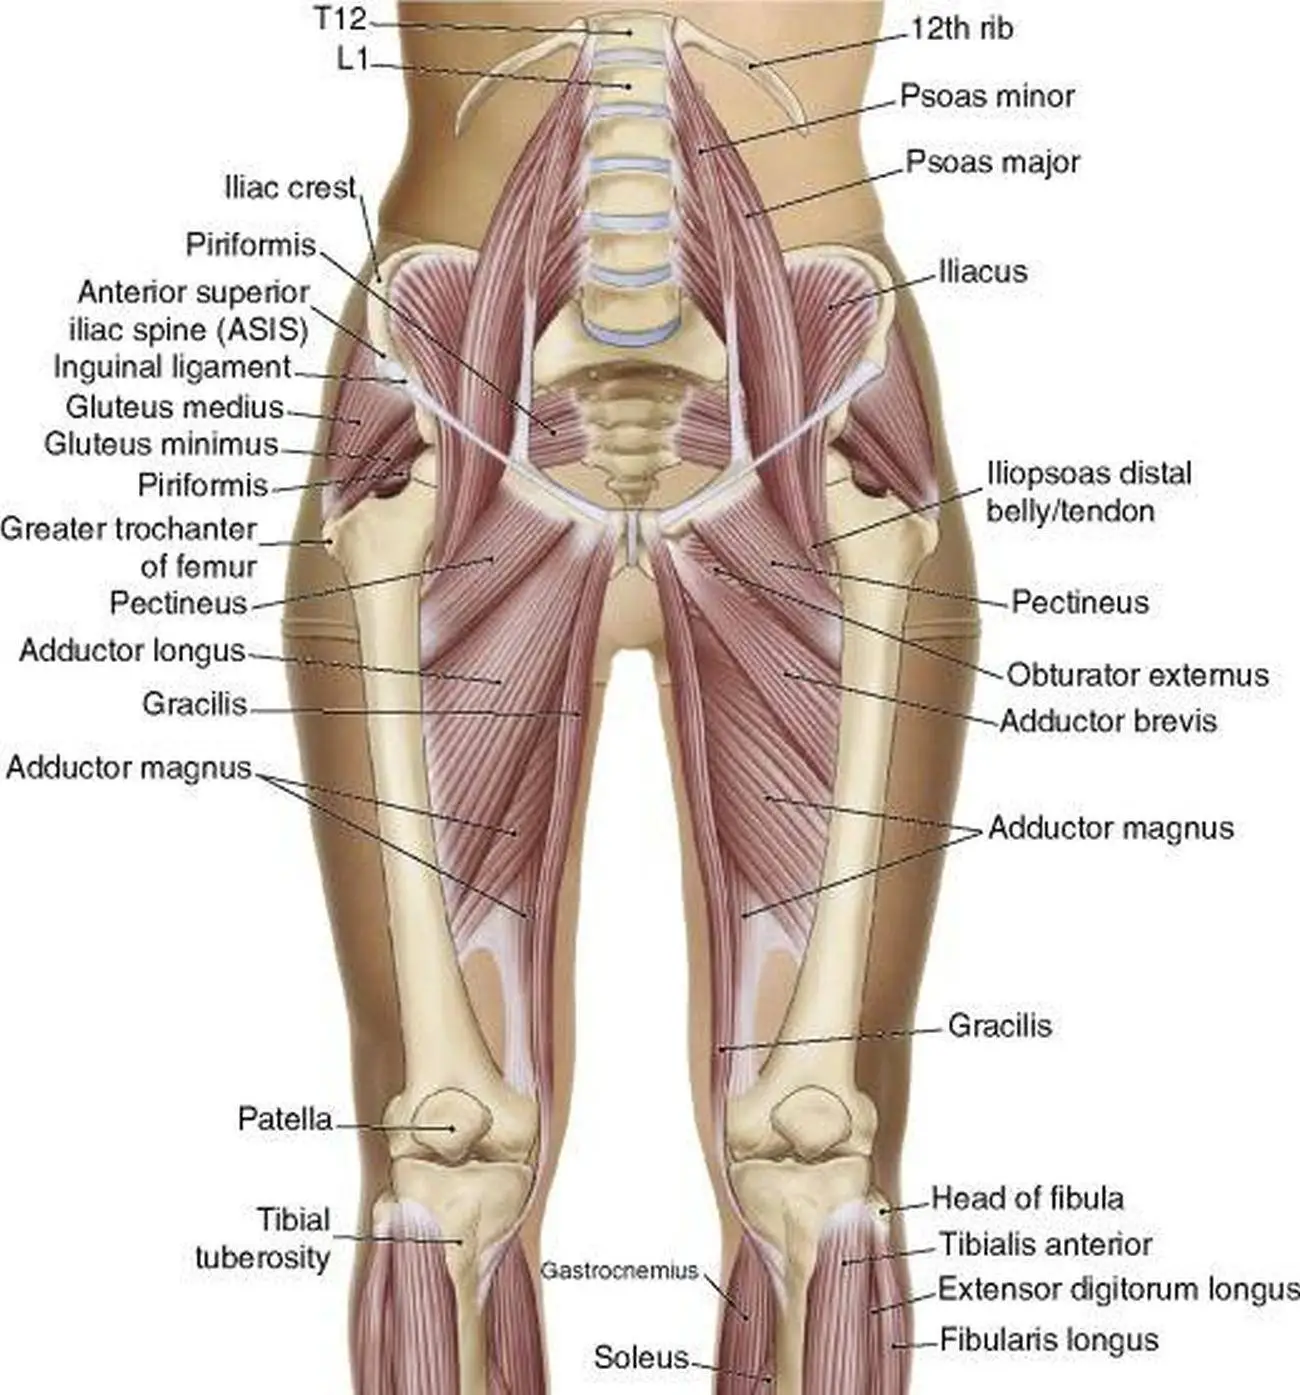 Pictures Of Adductor Longus Tendons